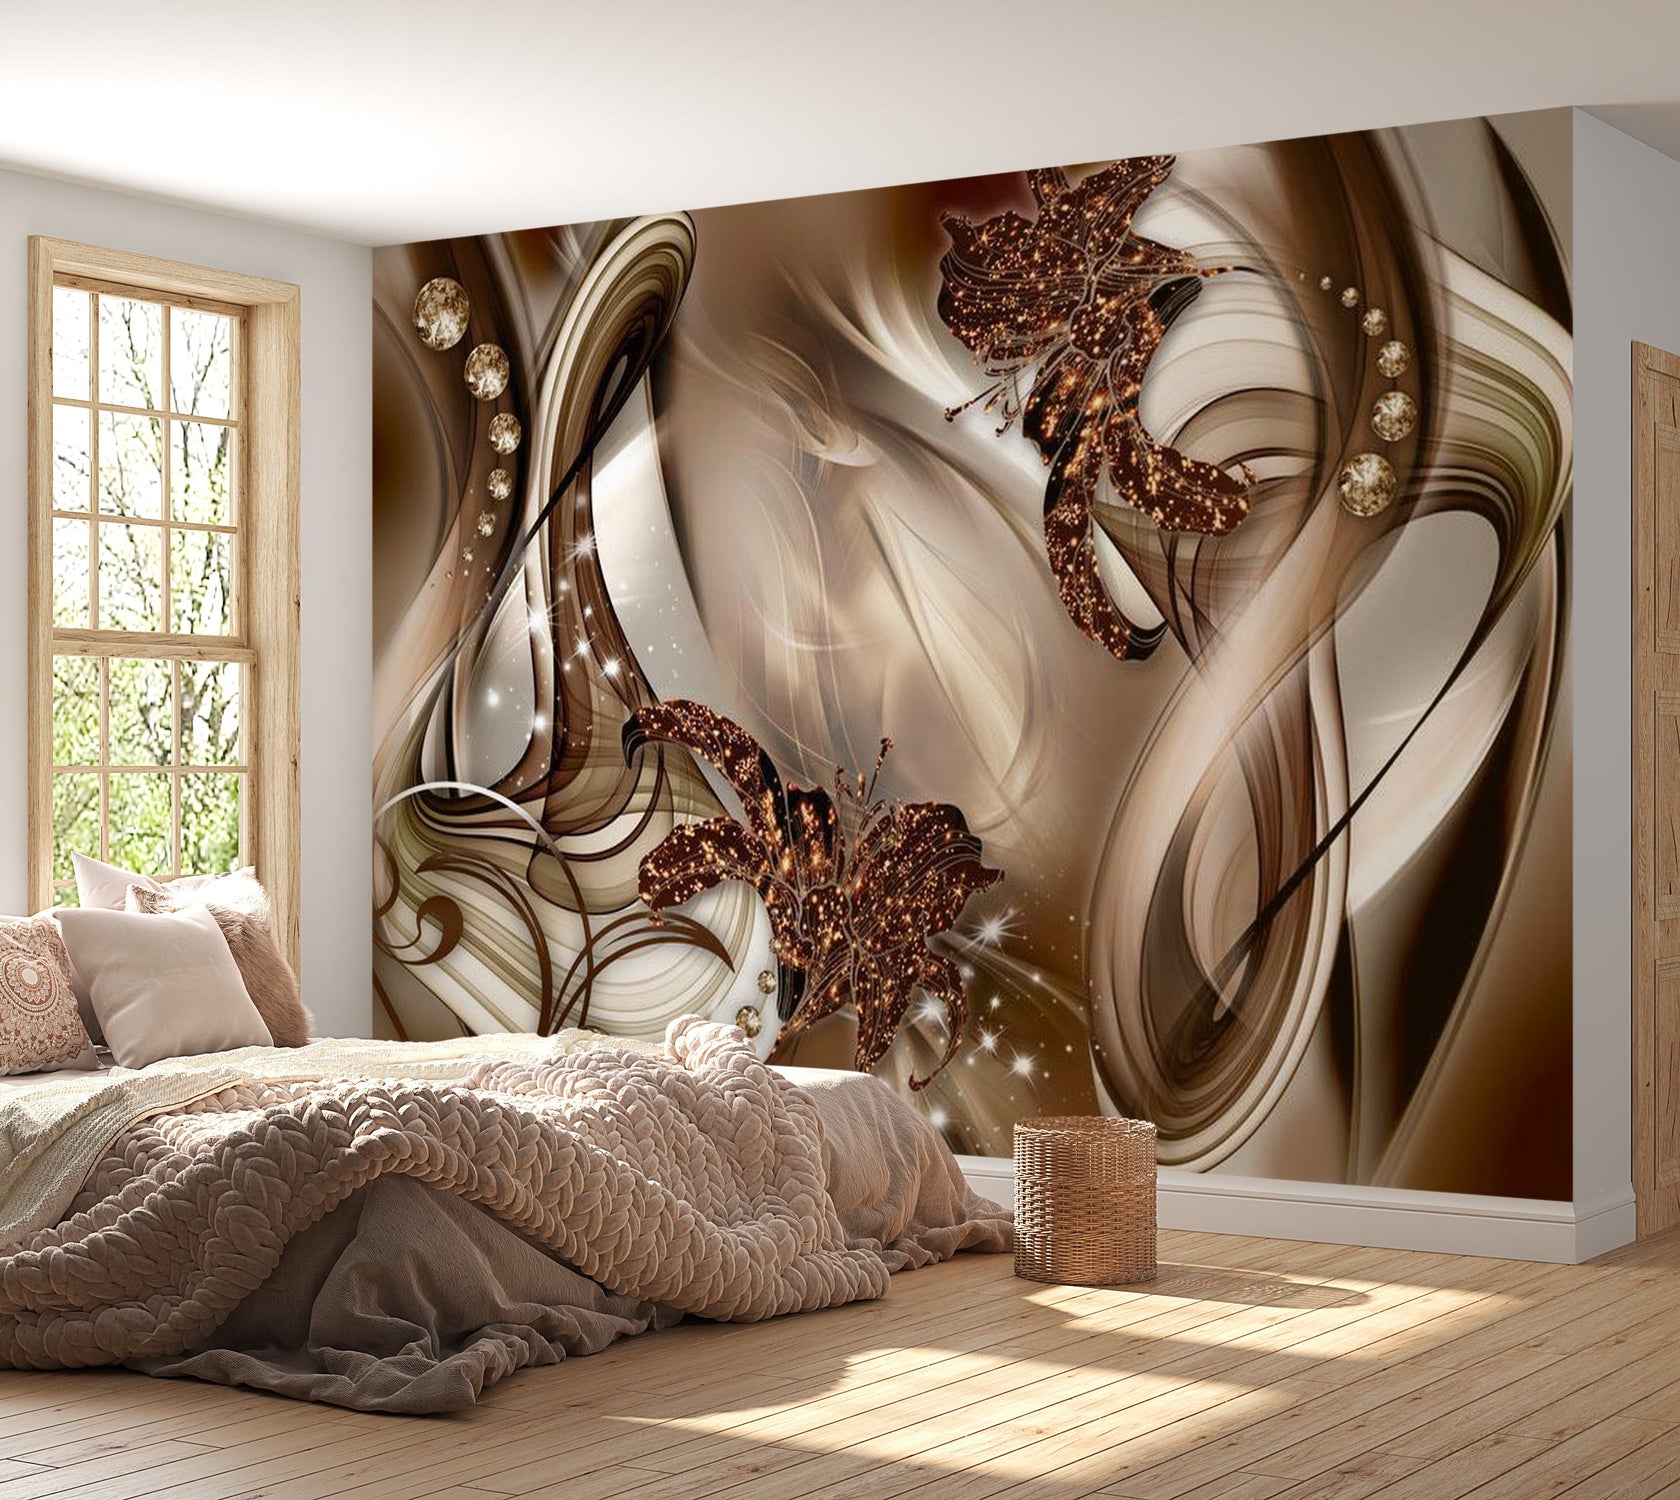 Peel & Stick Glam Wall Mural - Eccentric Composition - Removable Wall Decals